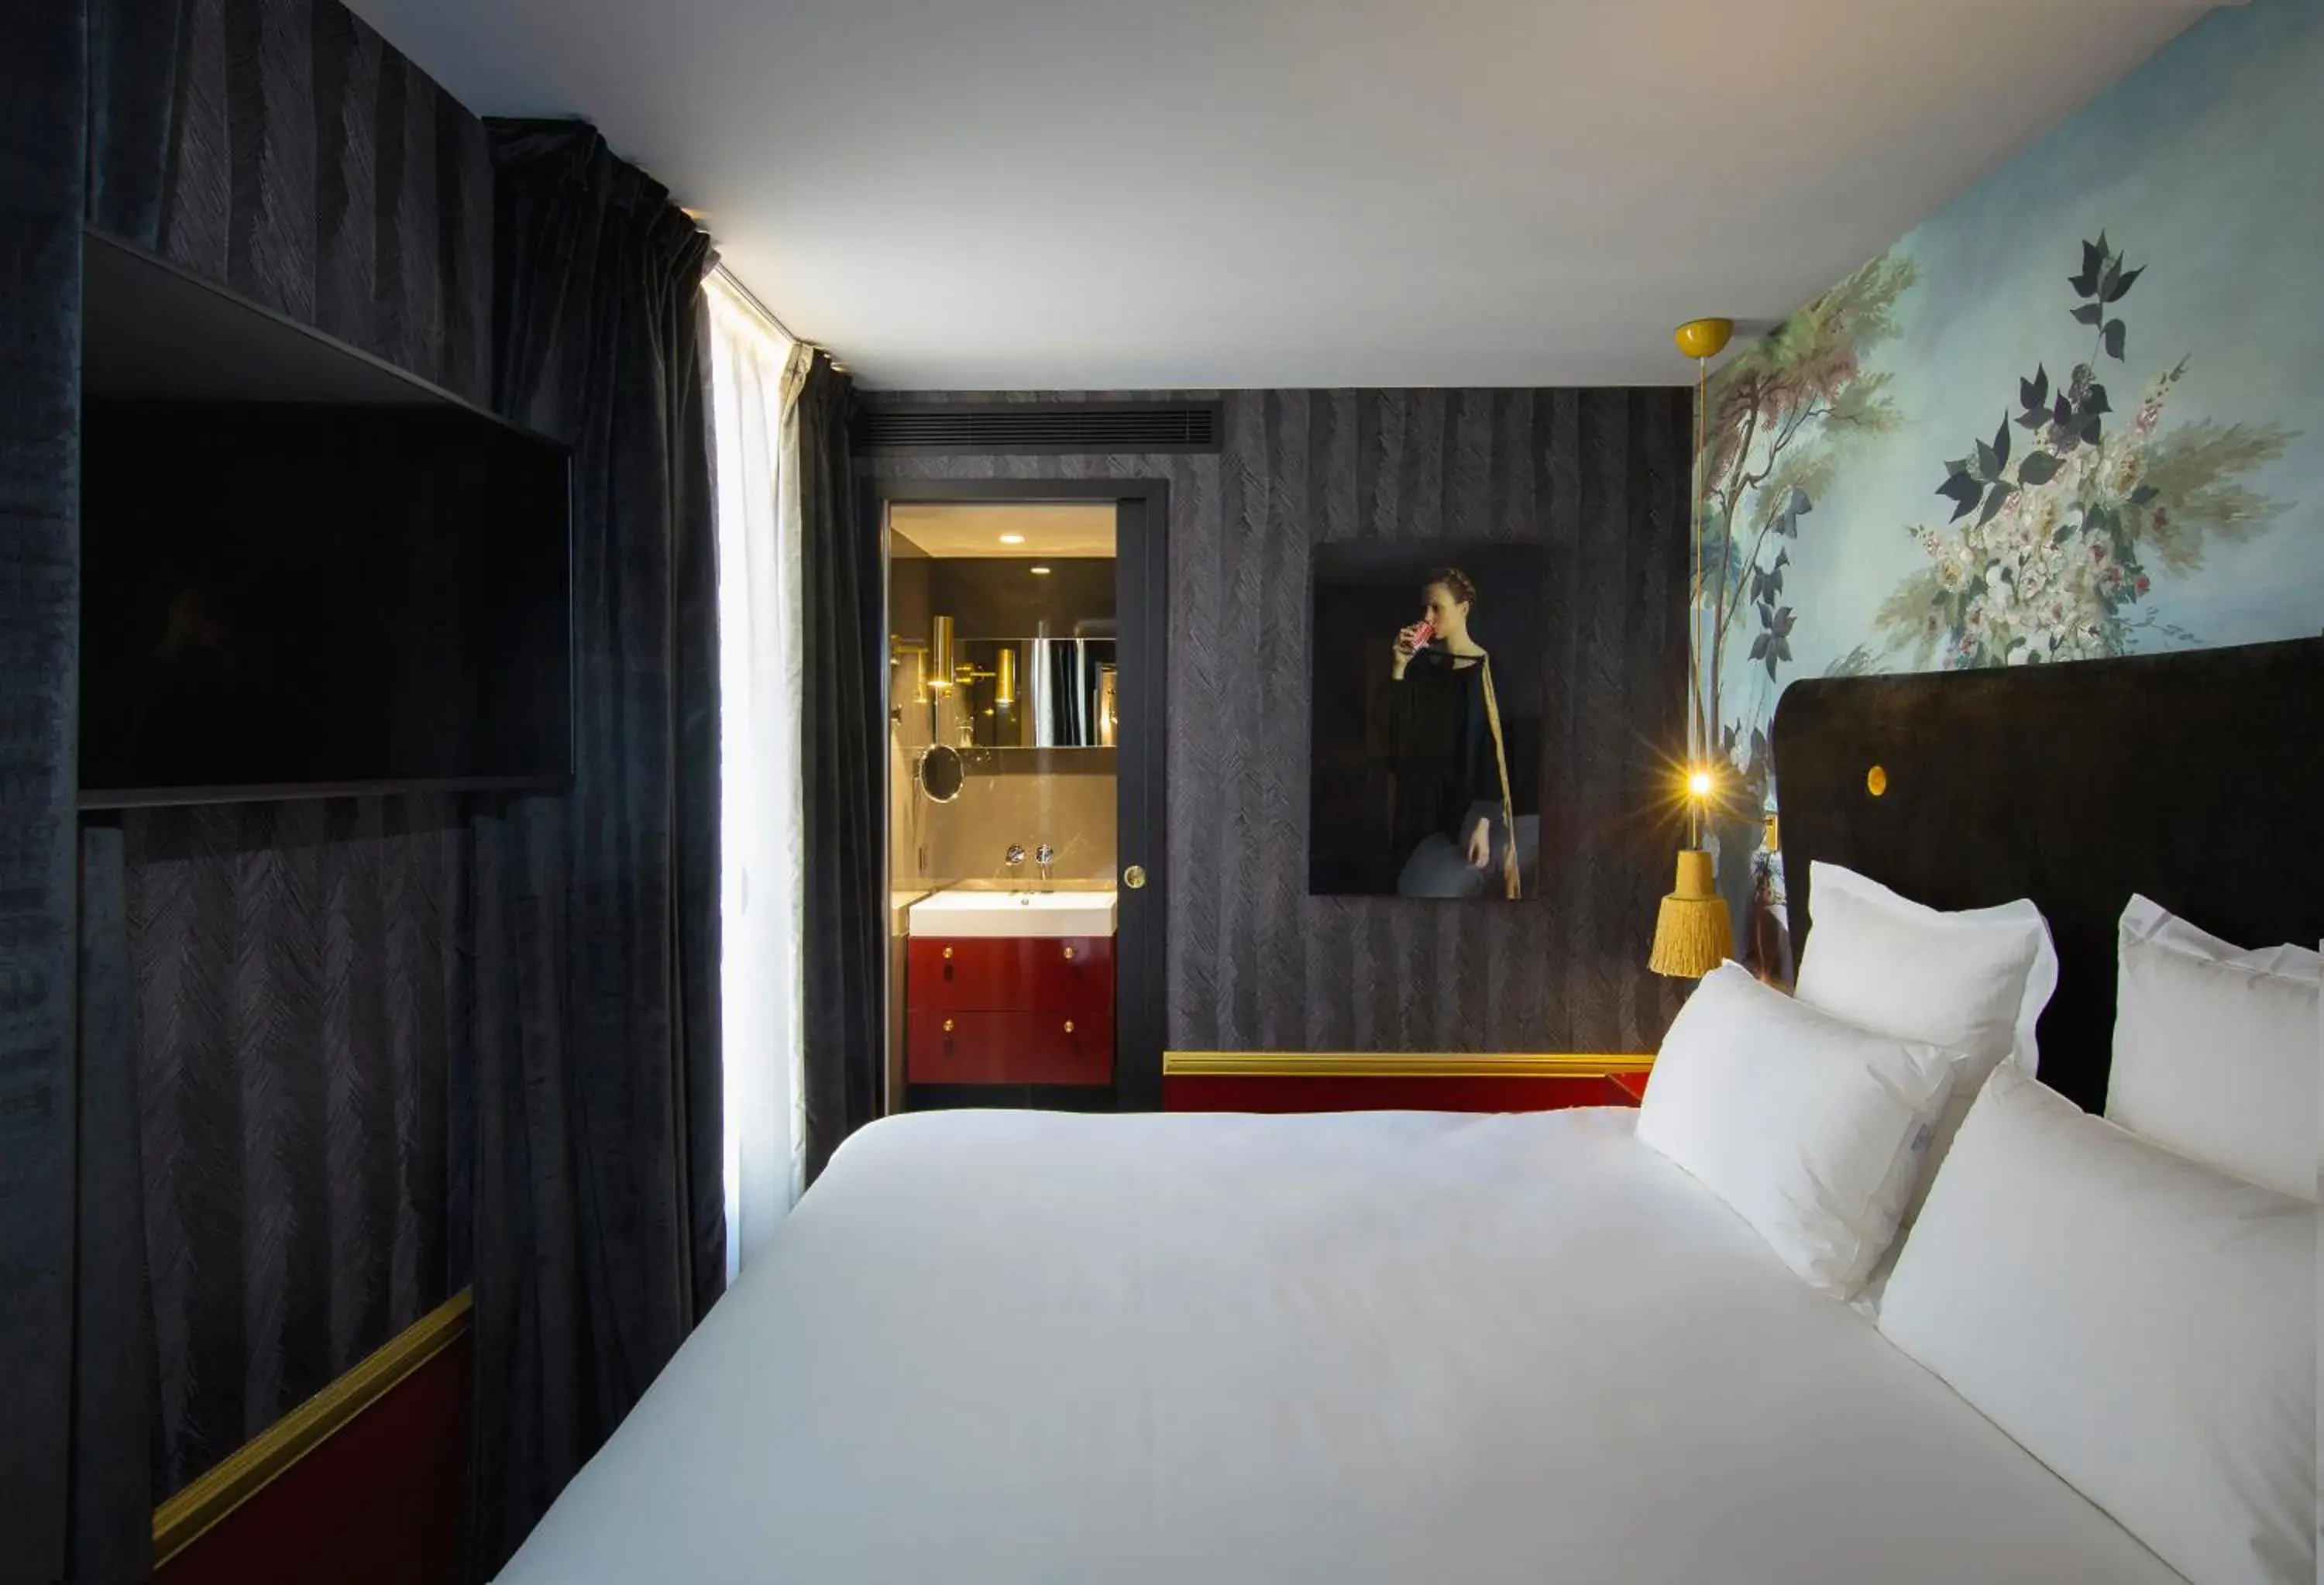 Bed, Room Photo in Snob Hotel by Elegancia